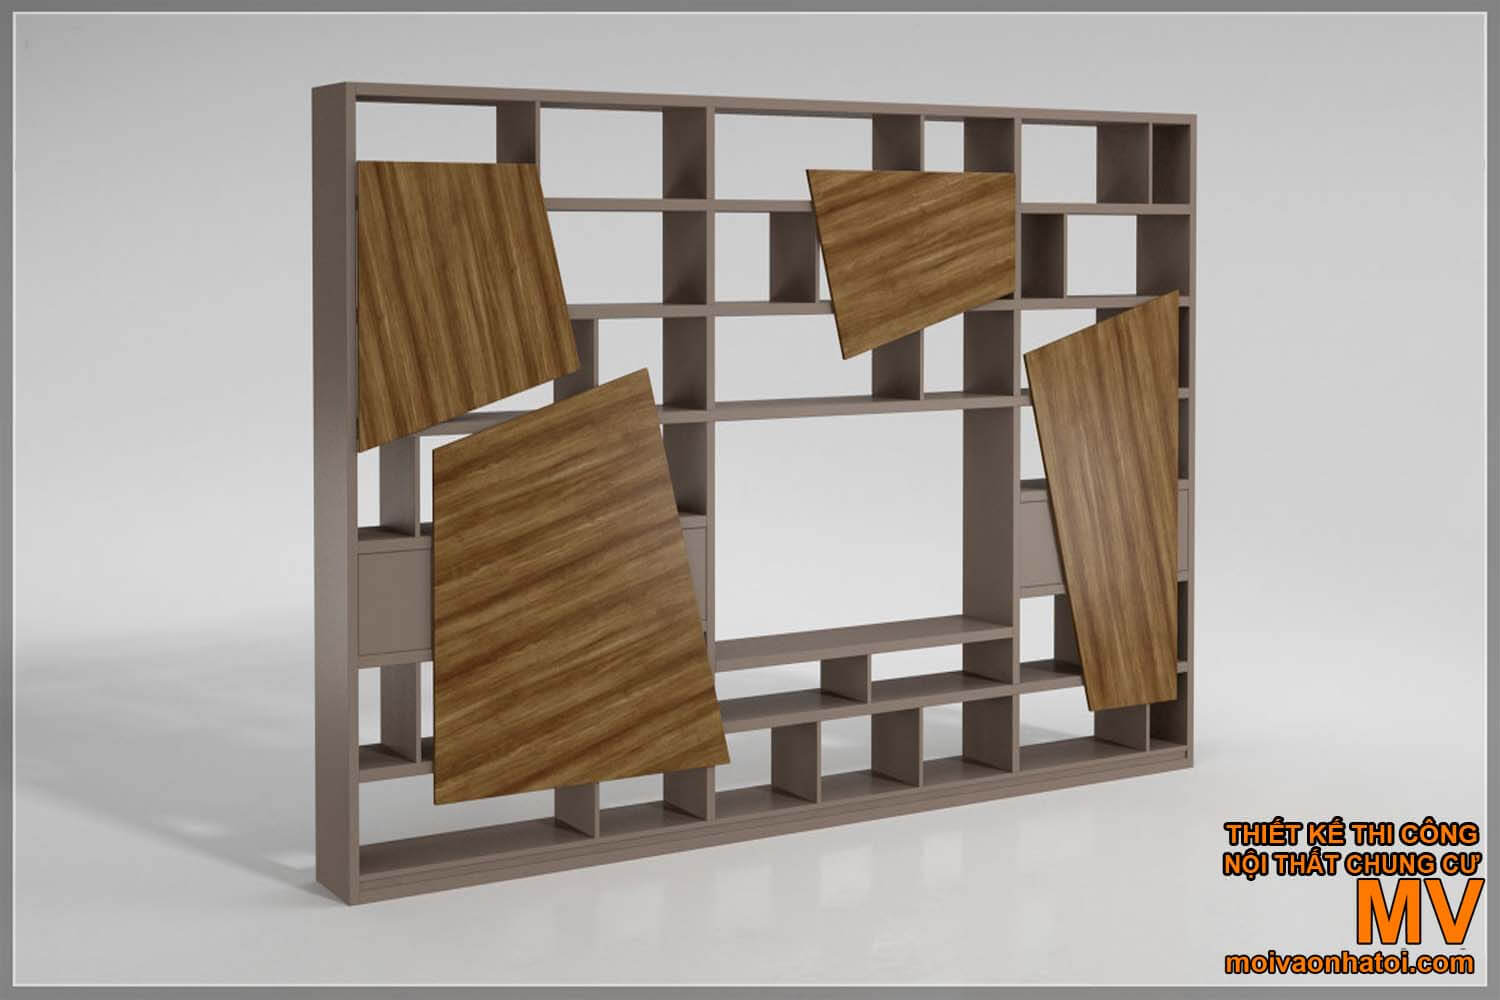 Wooden wall for television